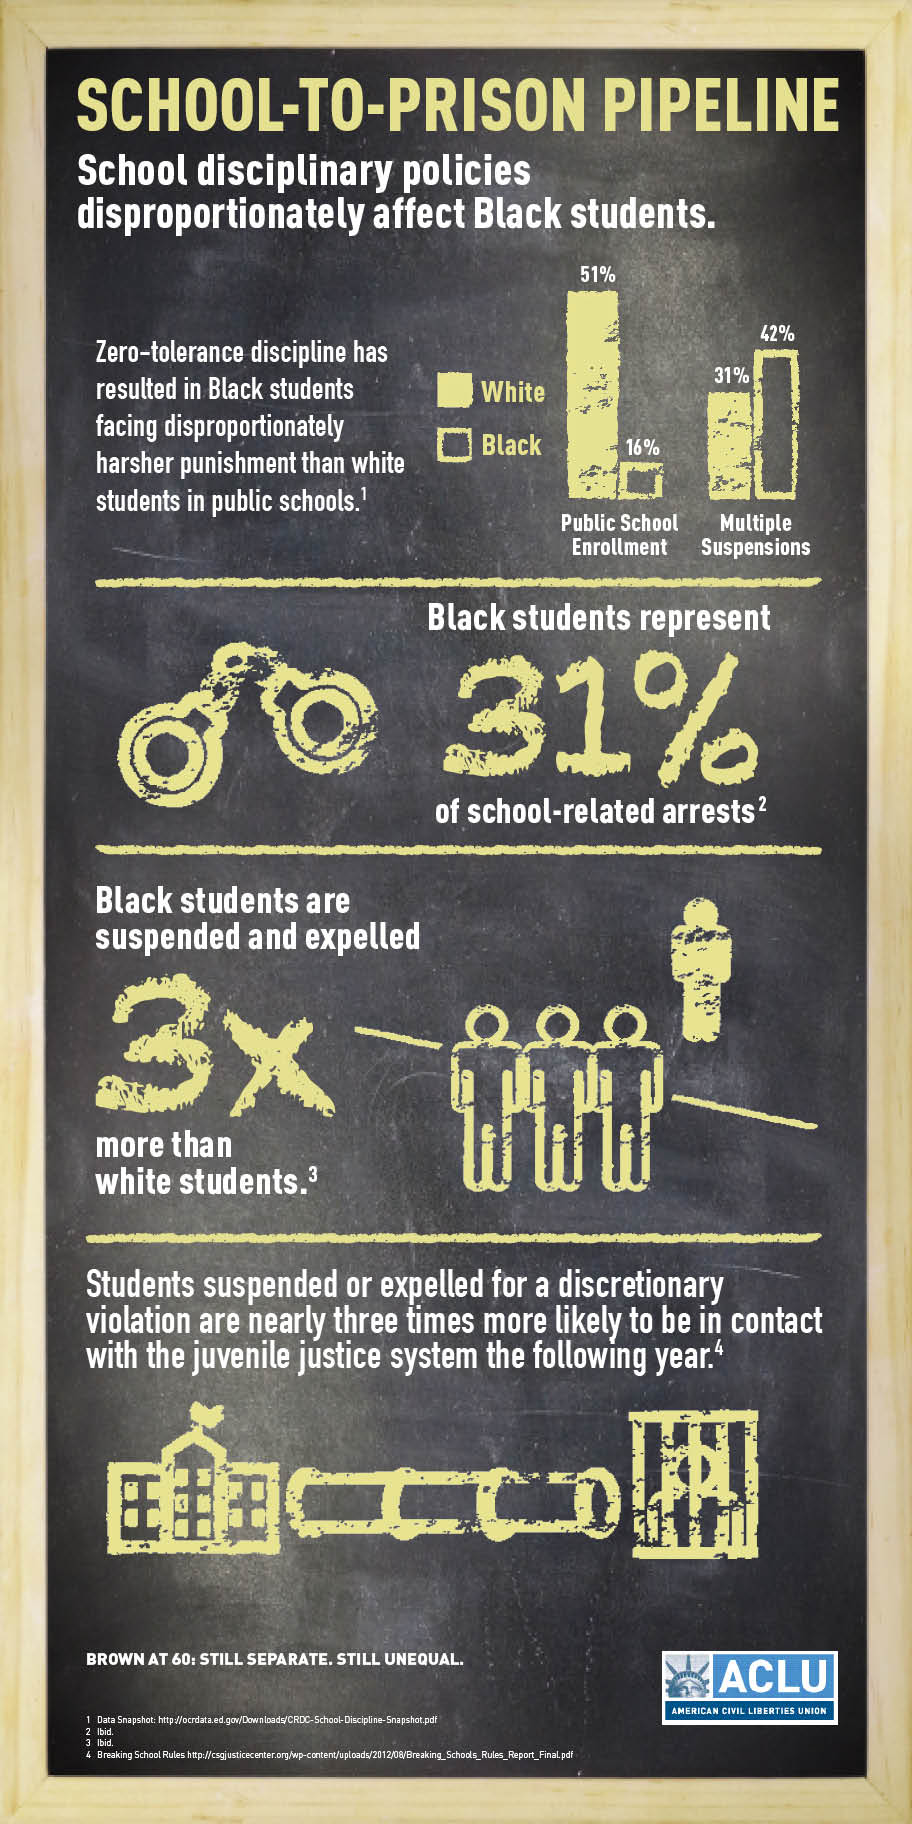 School-to-Prison Pipeline: School disciplinary policies disproportionately affect Black students